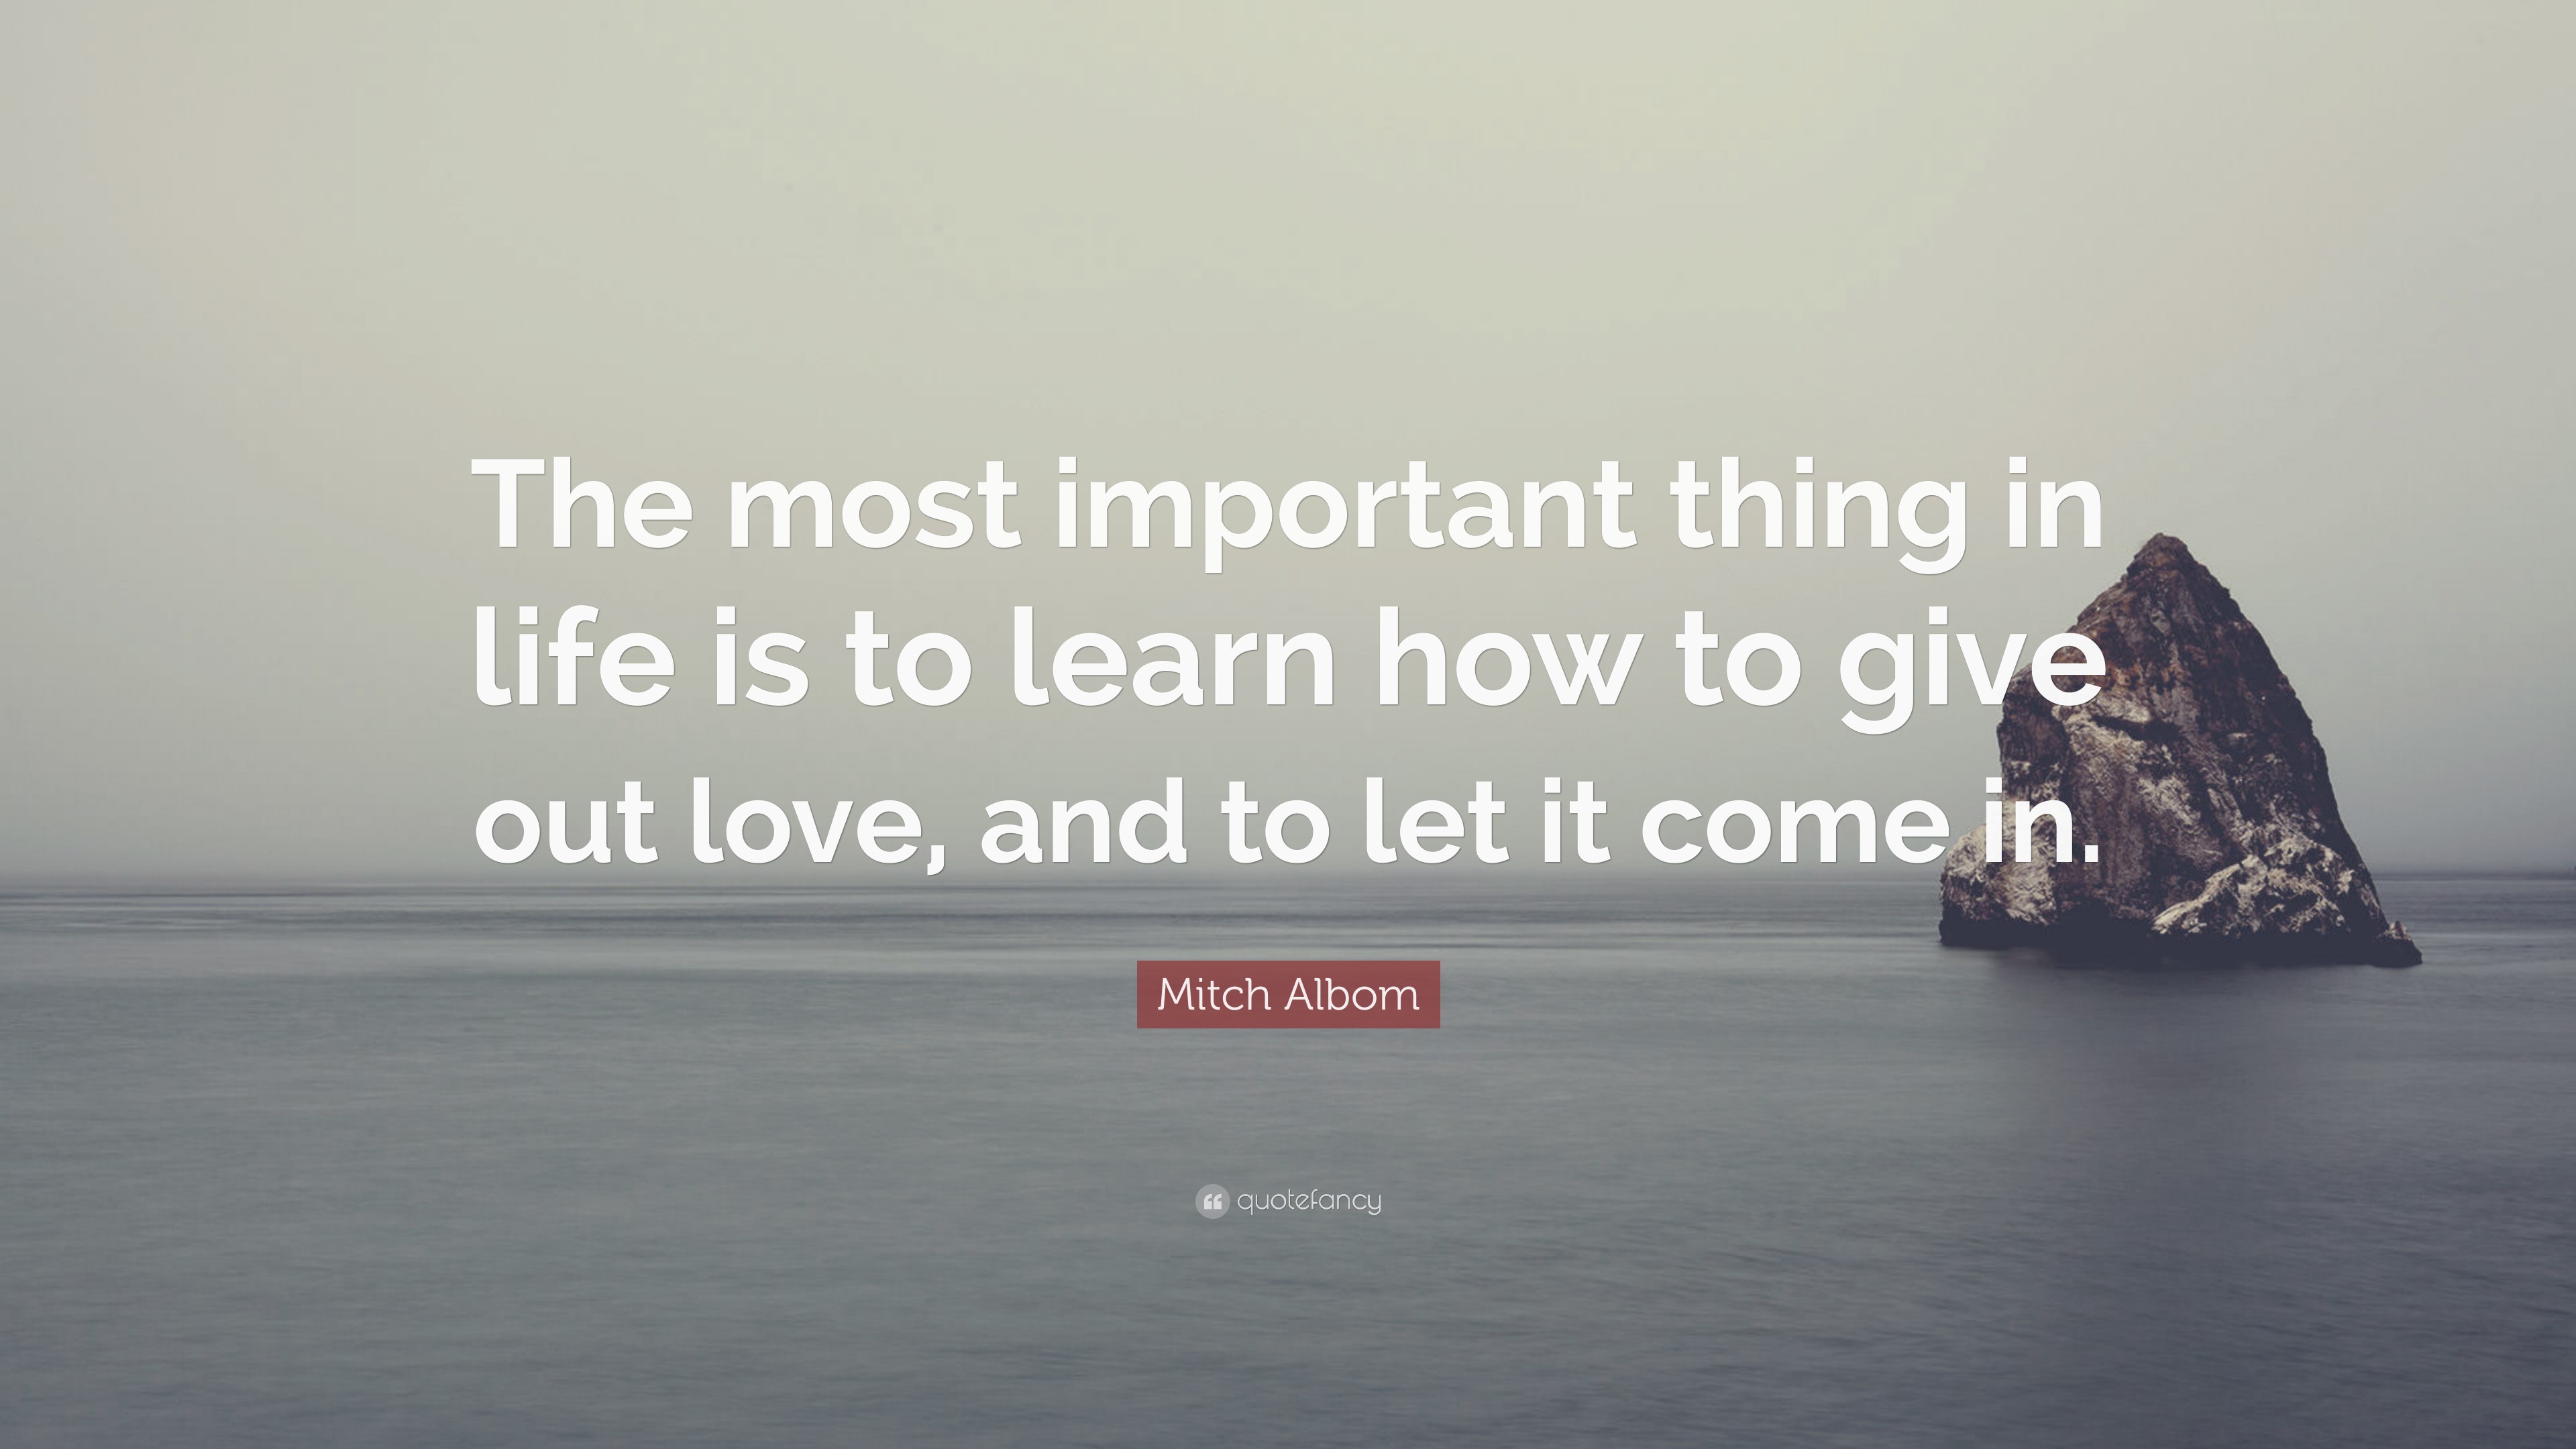 Mitch Albom Quote “The most important thing in life is to learn how to